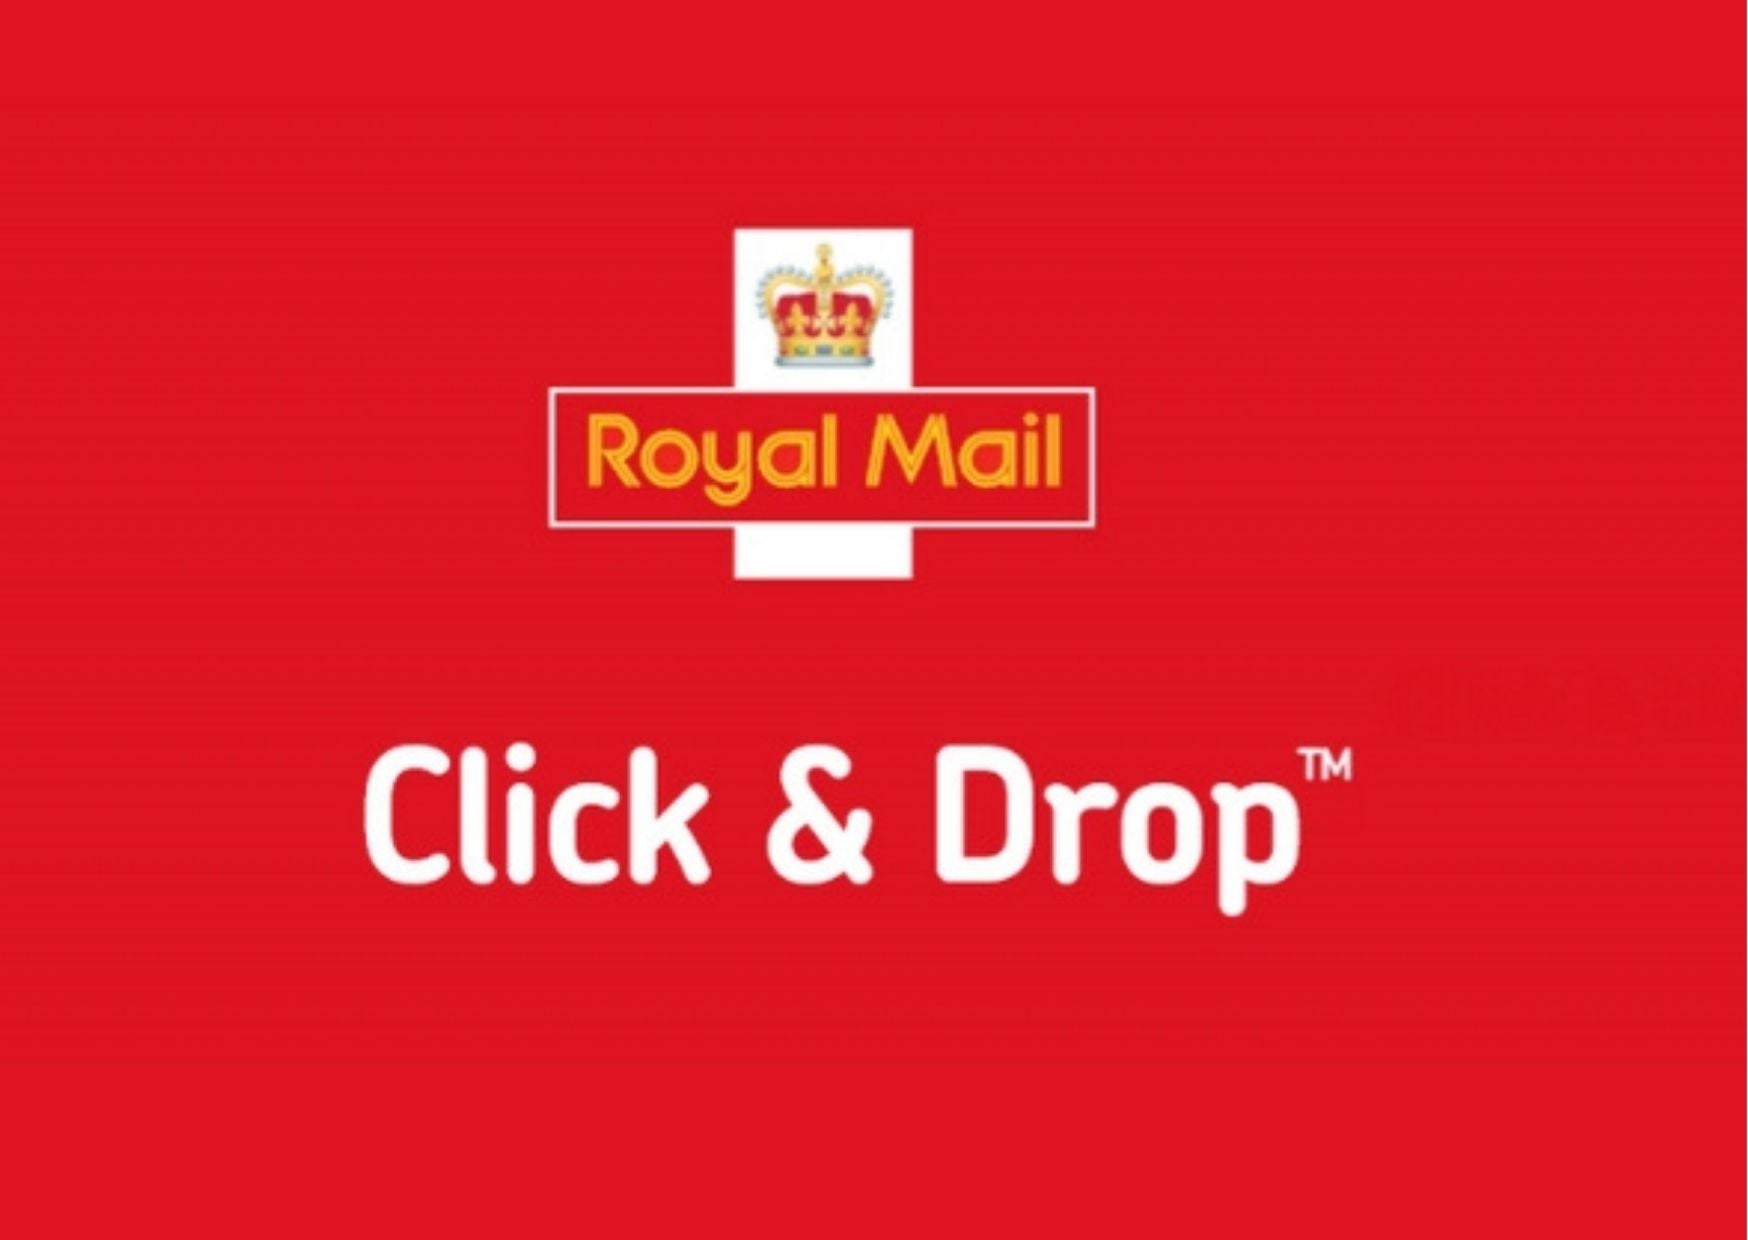 How do you use Royal Mail Click & Drop and which type of label will I need?